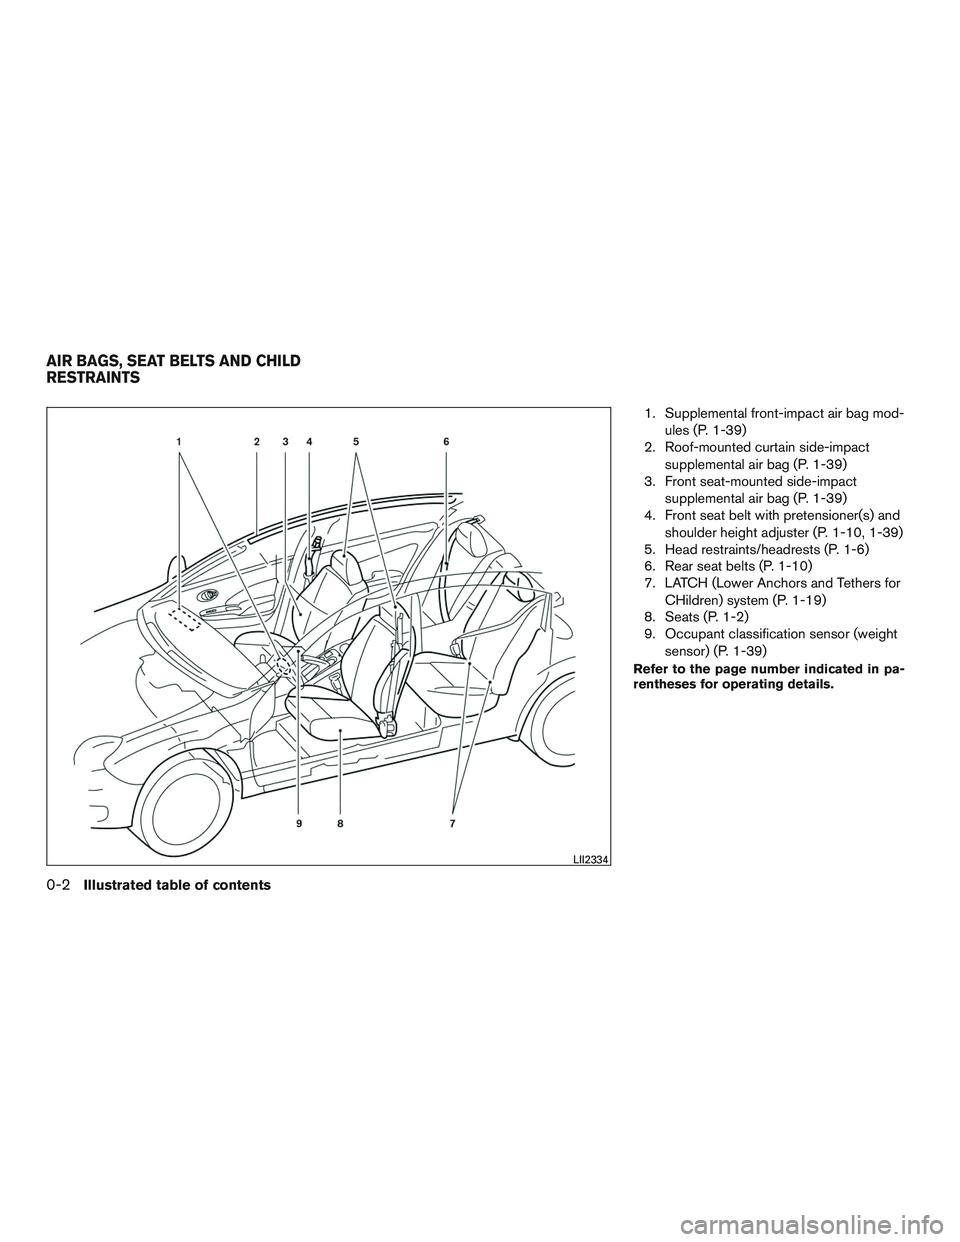 NISSAN MICRA 2016  Owner´s Manual 1. Supplemental front-impact air bag mod-ules (P. 1-39)
2. Roof-mounted curtain side-impact
supplemental air bag (P. 1-39)
3. Front seat-mounted side-impact
supplemental air bag (P. 1-39)
4. Front sea